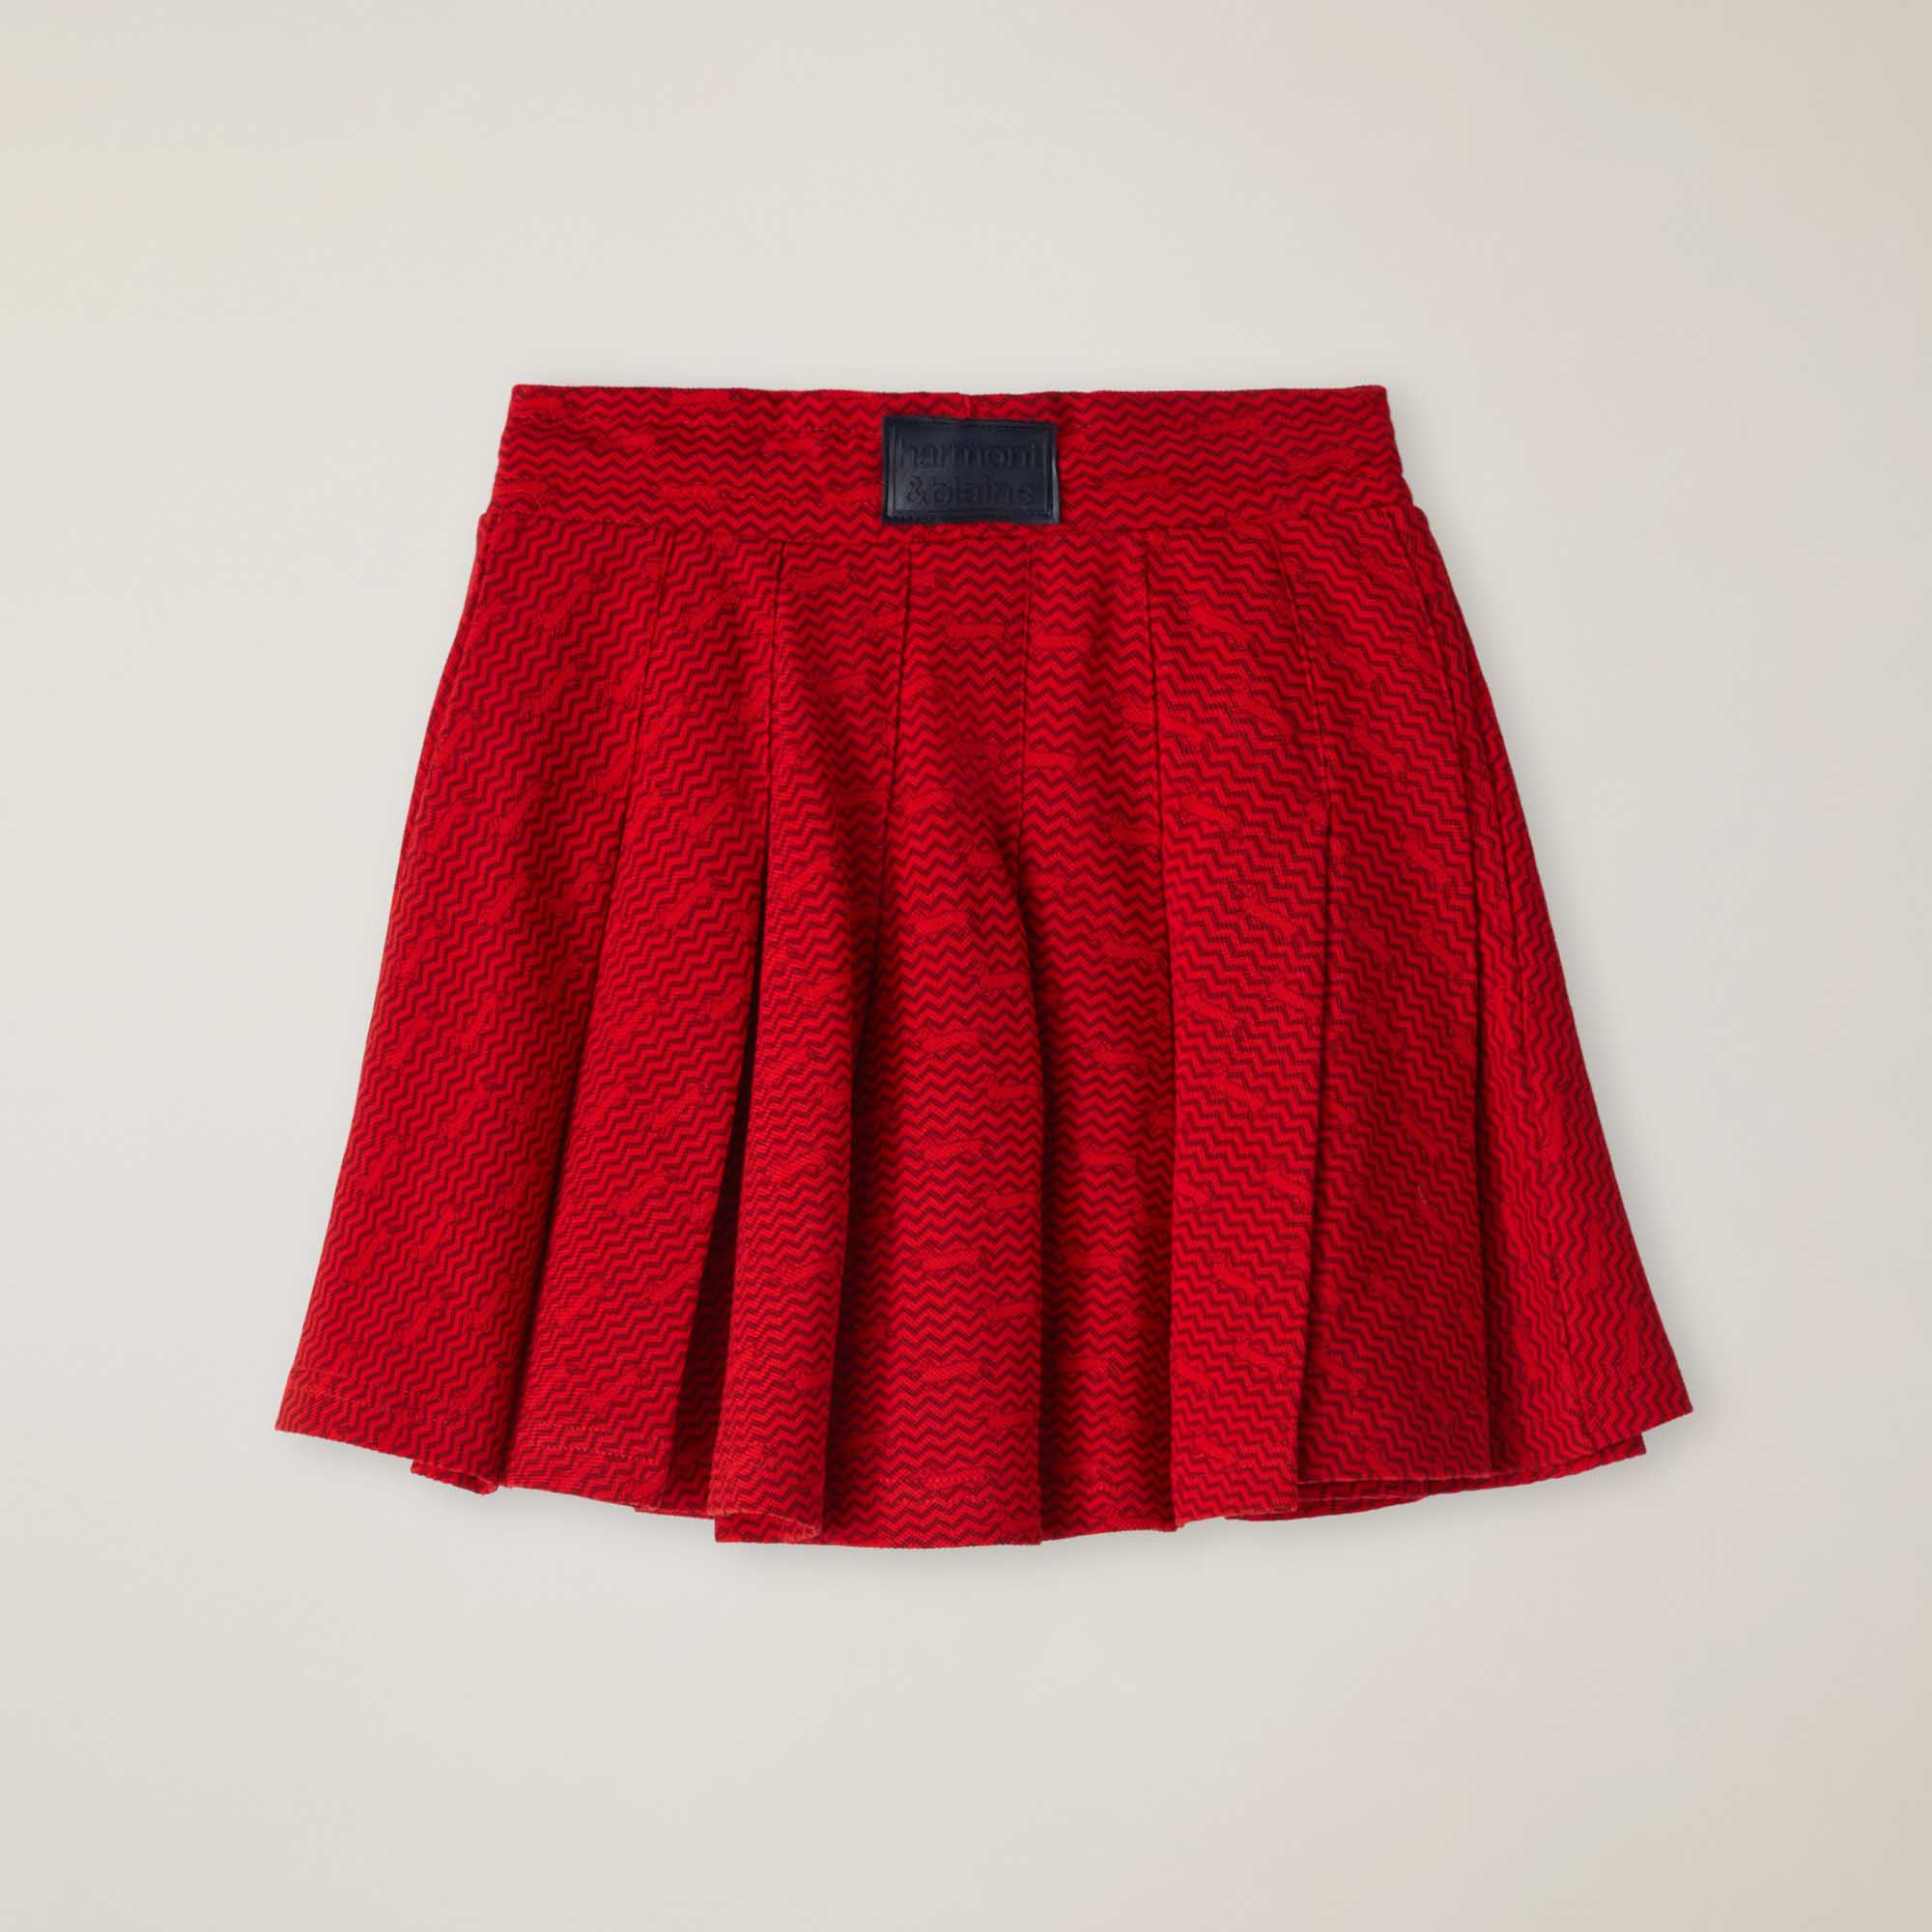 Micro-patterned print skirt, Red, large image number 1